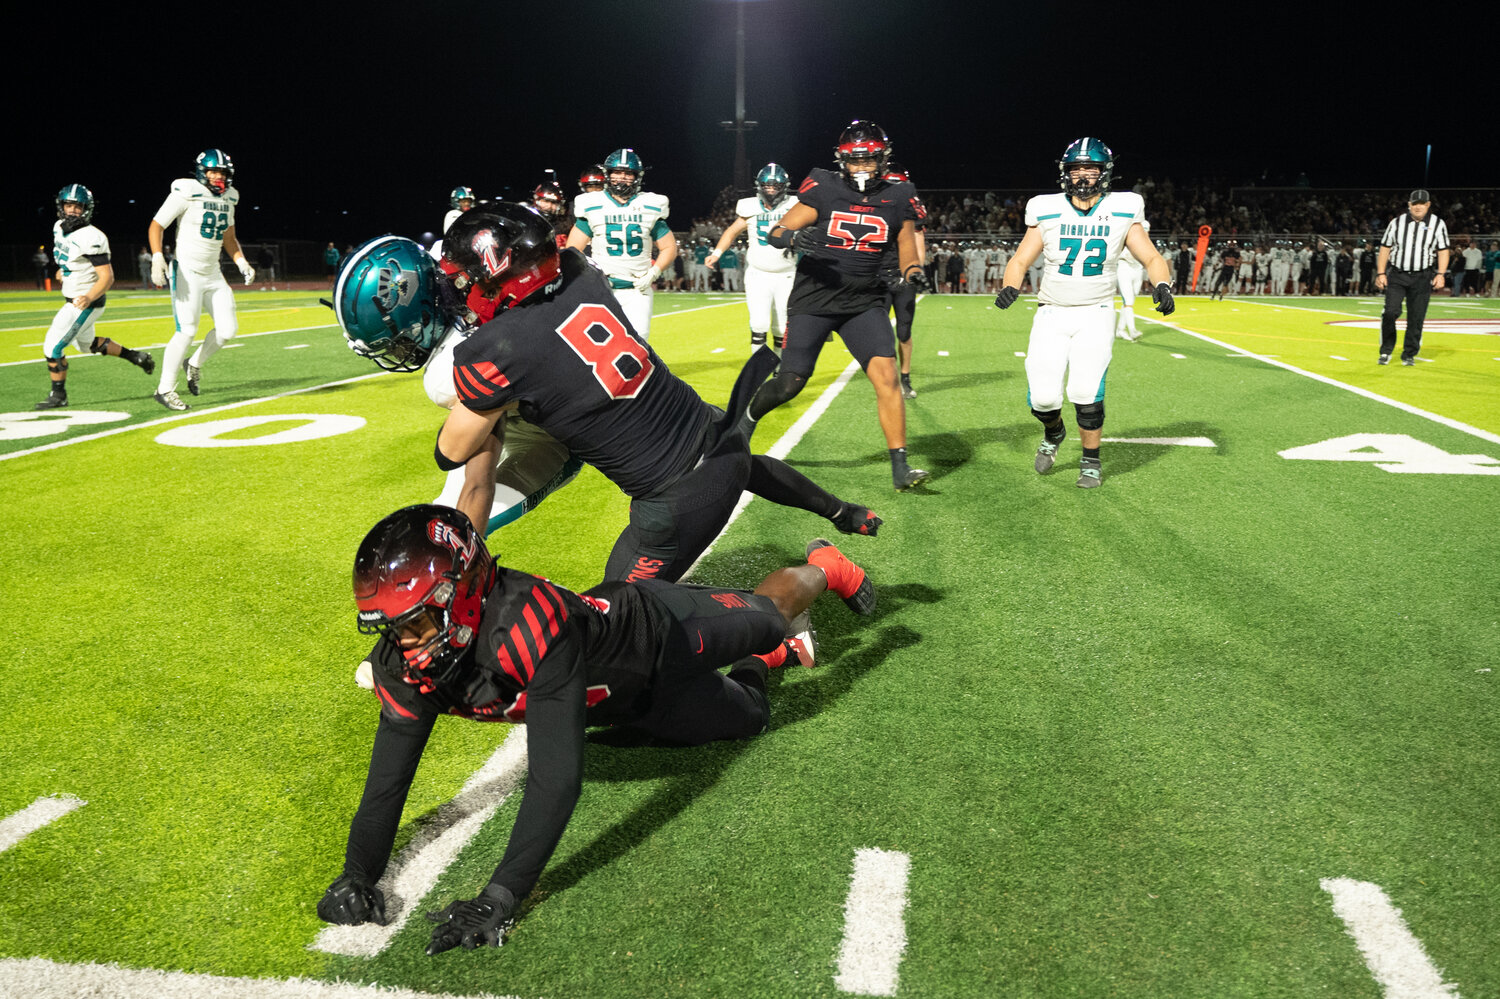 Liberty linebacker Keaton Stam (8) stops a Highland player in the Lions' 54-12 win on Saturday night in the Open Division Semifinals. (Courtesy Picture Lady Photography for West Valley Preps)